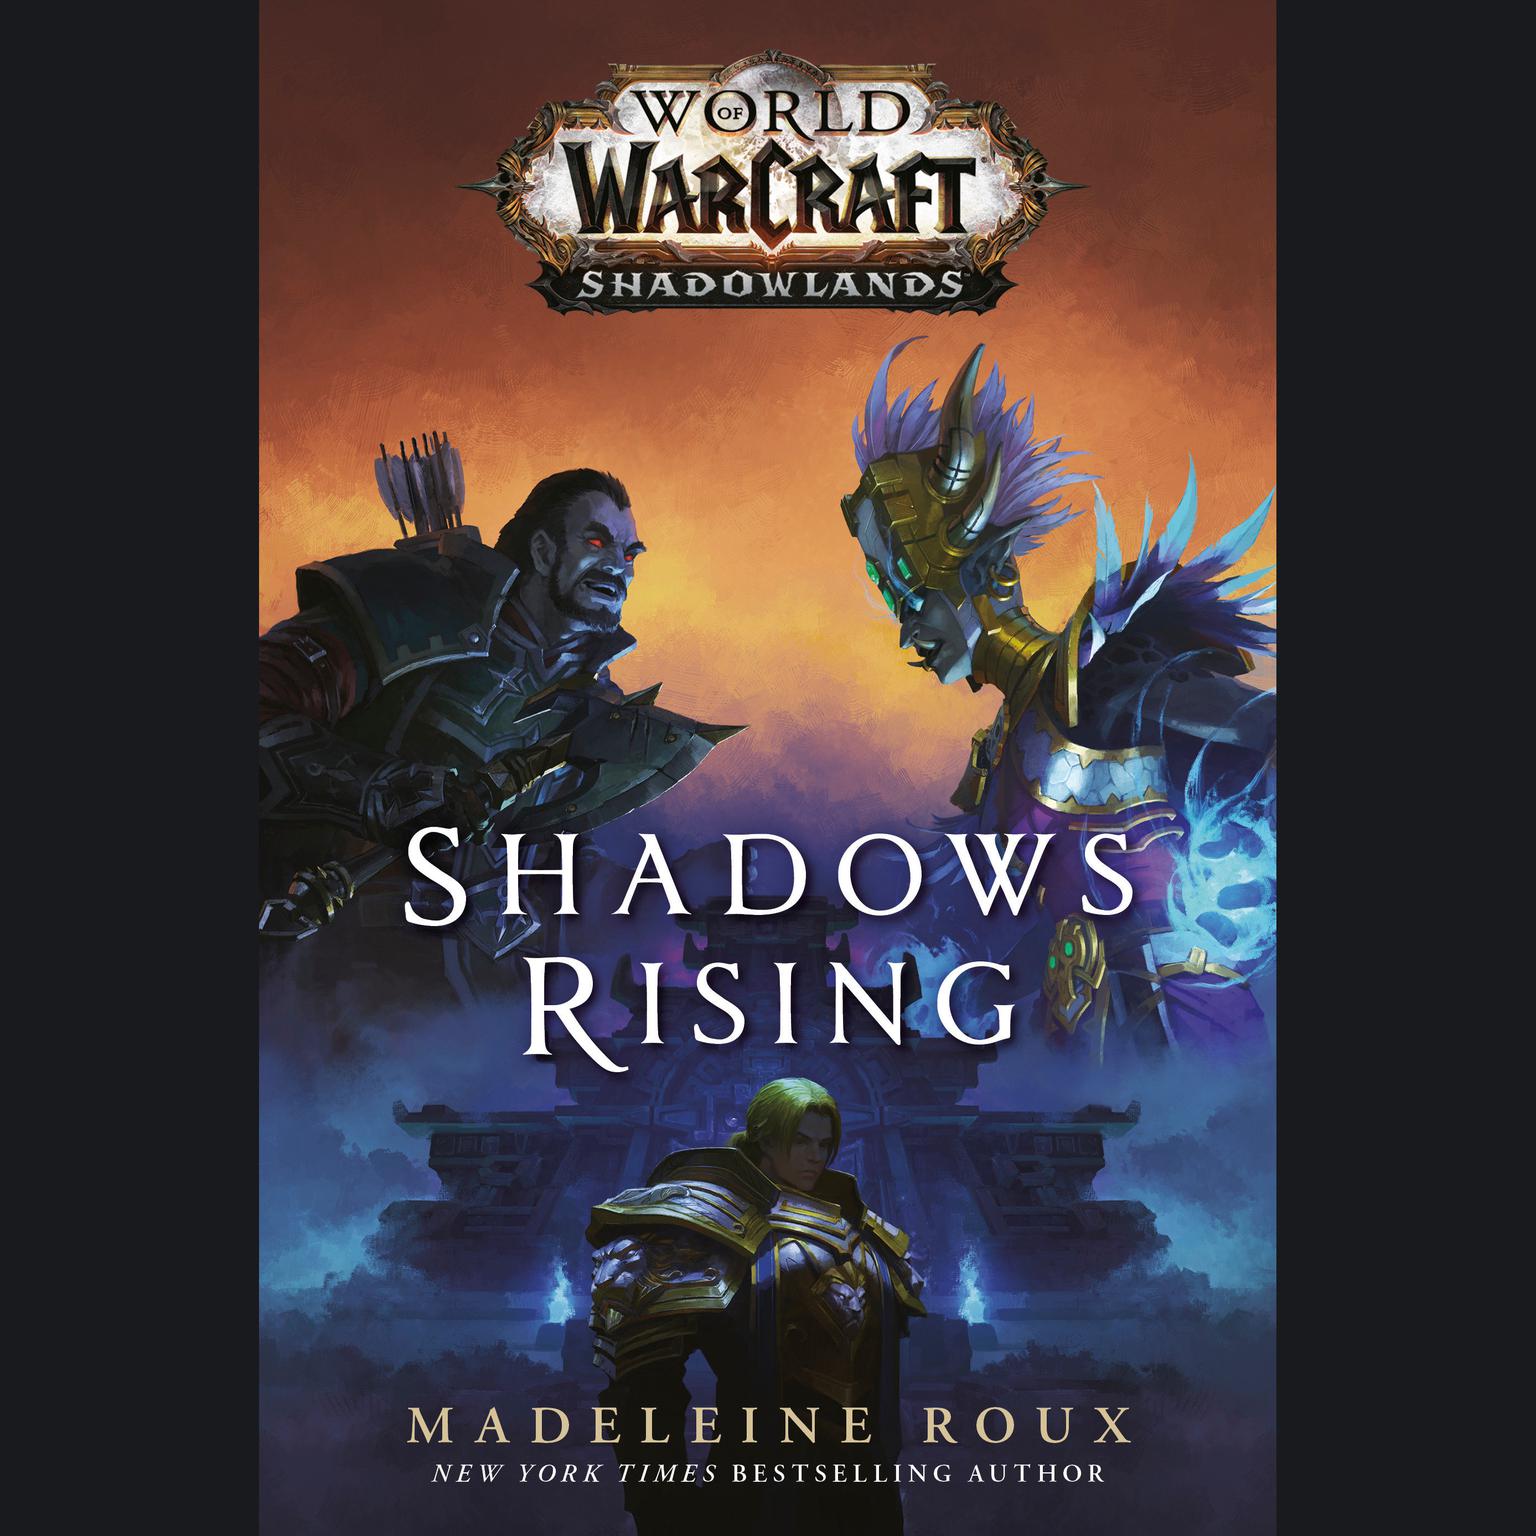 Shadows Rising (World of Warcraft: Shadowlands) Audiobook, by Madeleine Roux